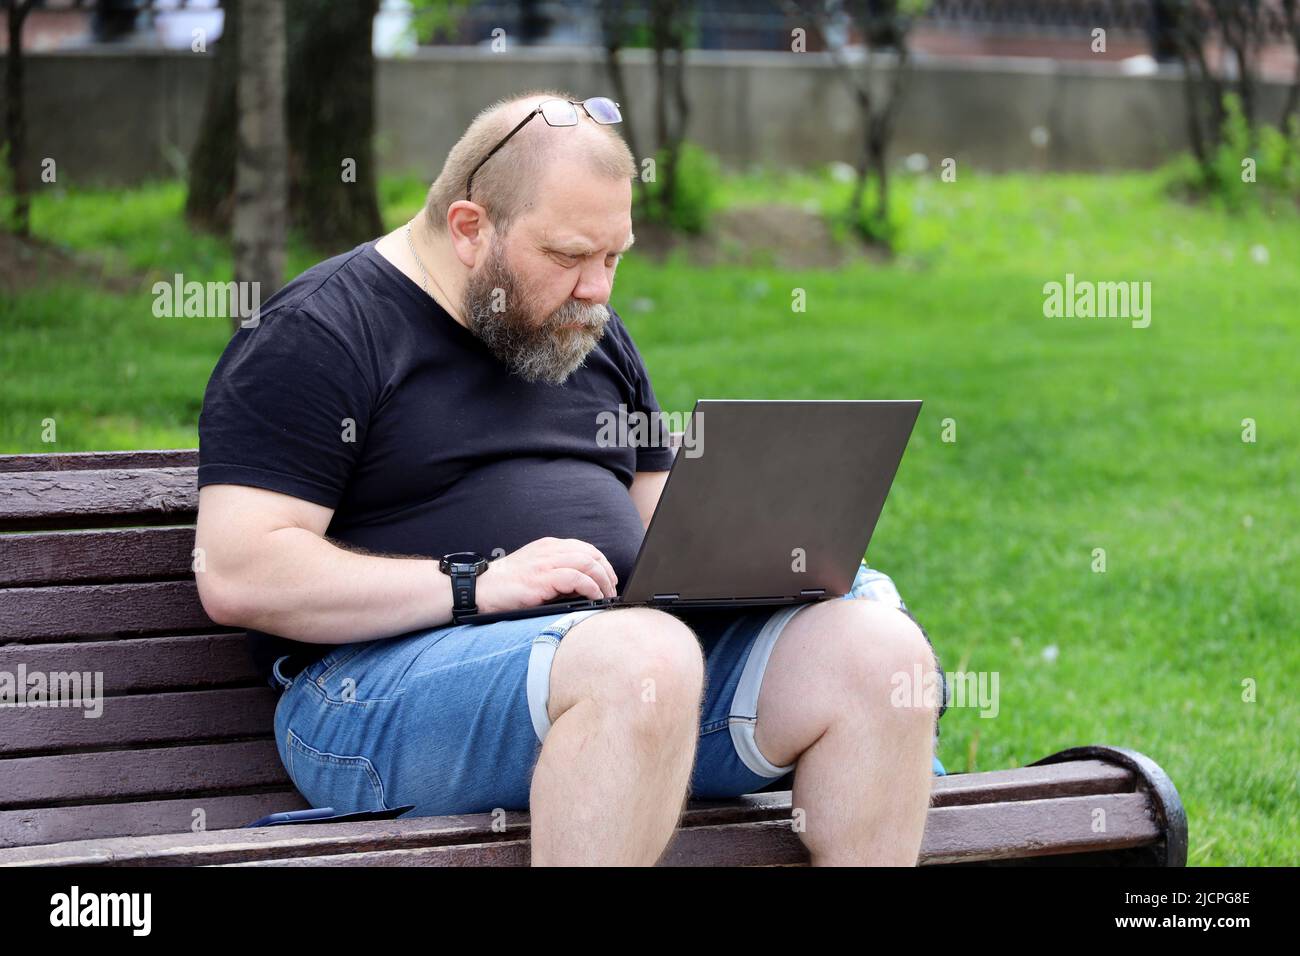 Bearded man in jeans shorts sitting with a laptop on a bench in summer park. Concept of freelancer working outdoors Stock Photo